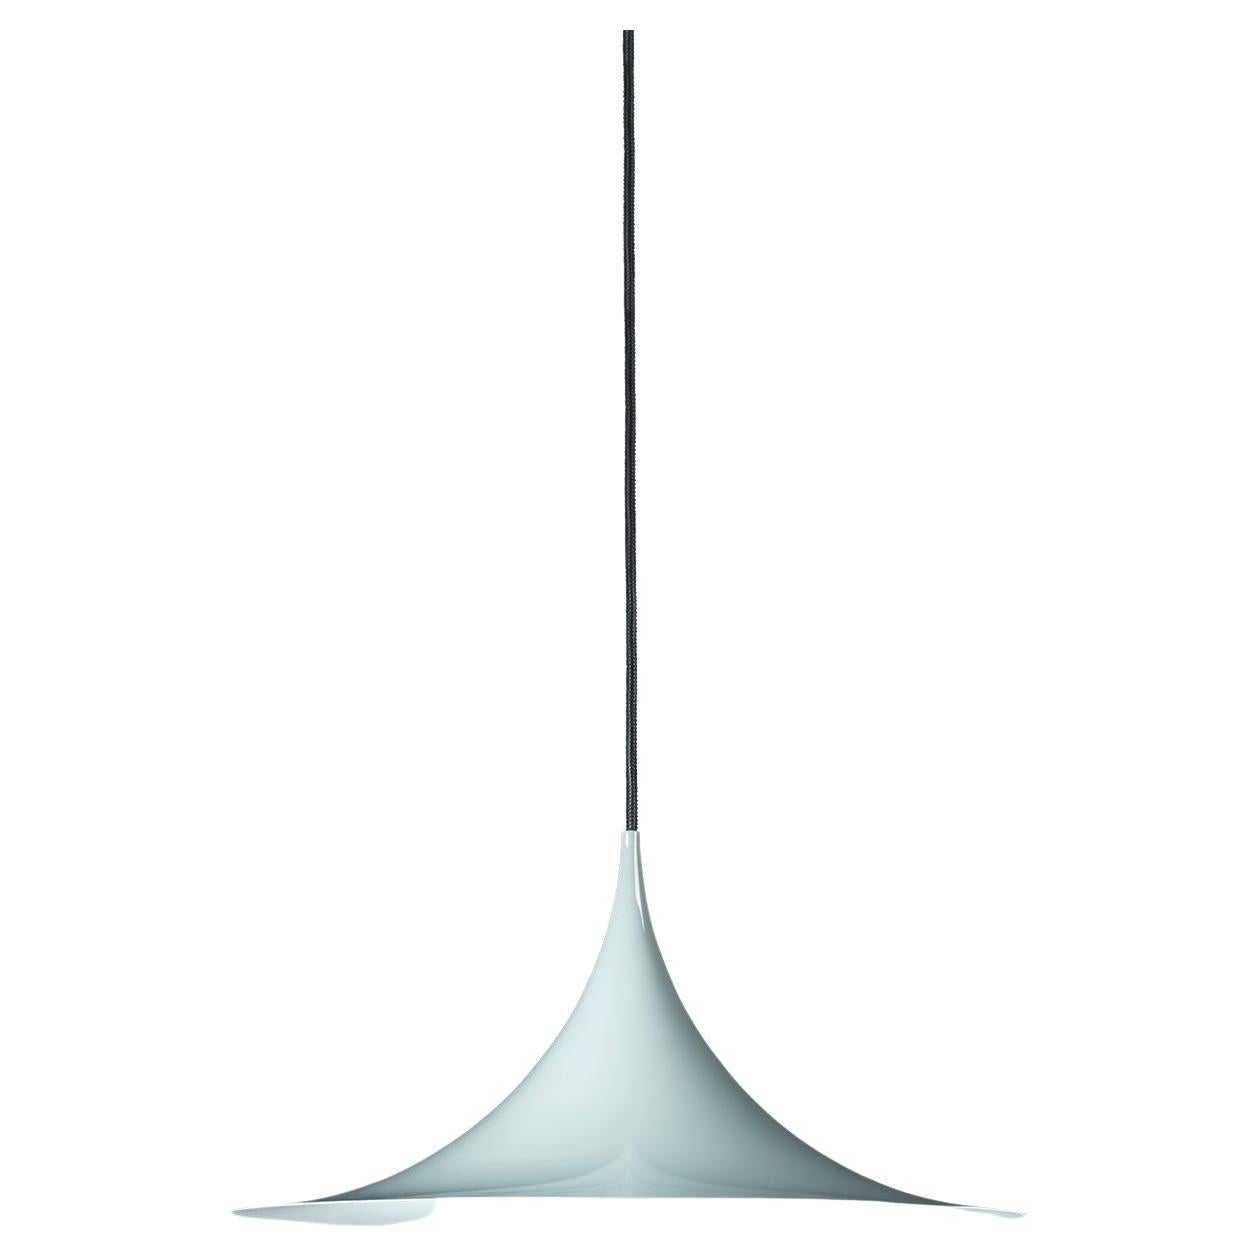 The Semi pendant is a unique pendant lamp, based on two quarter-circles put together, back-to-back. It’s distinctive arch-shaped, enamelled metal shade creates a diffused, cone-shaped light, ideal over a dining table or kitchen work surface. With